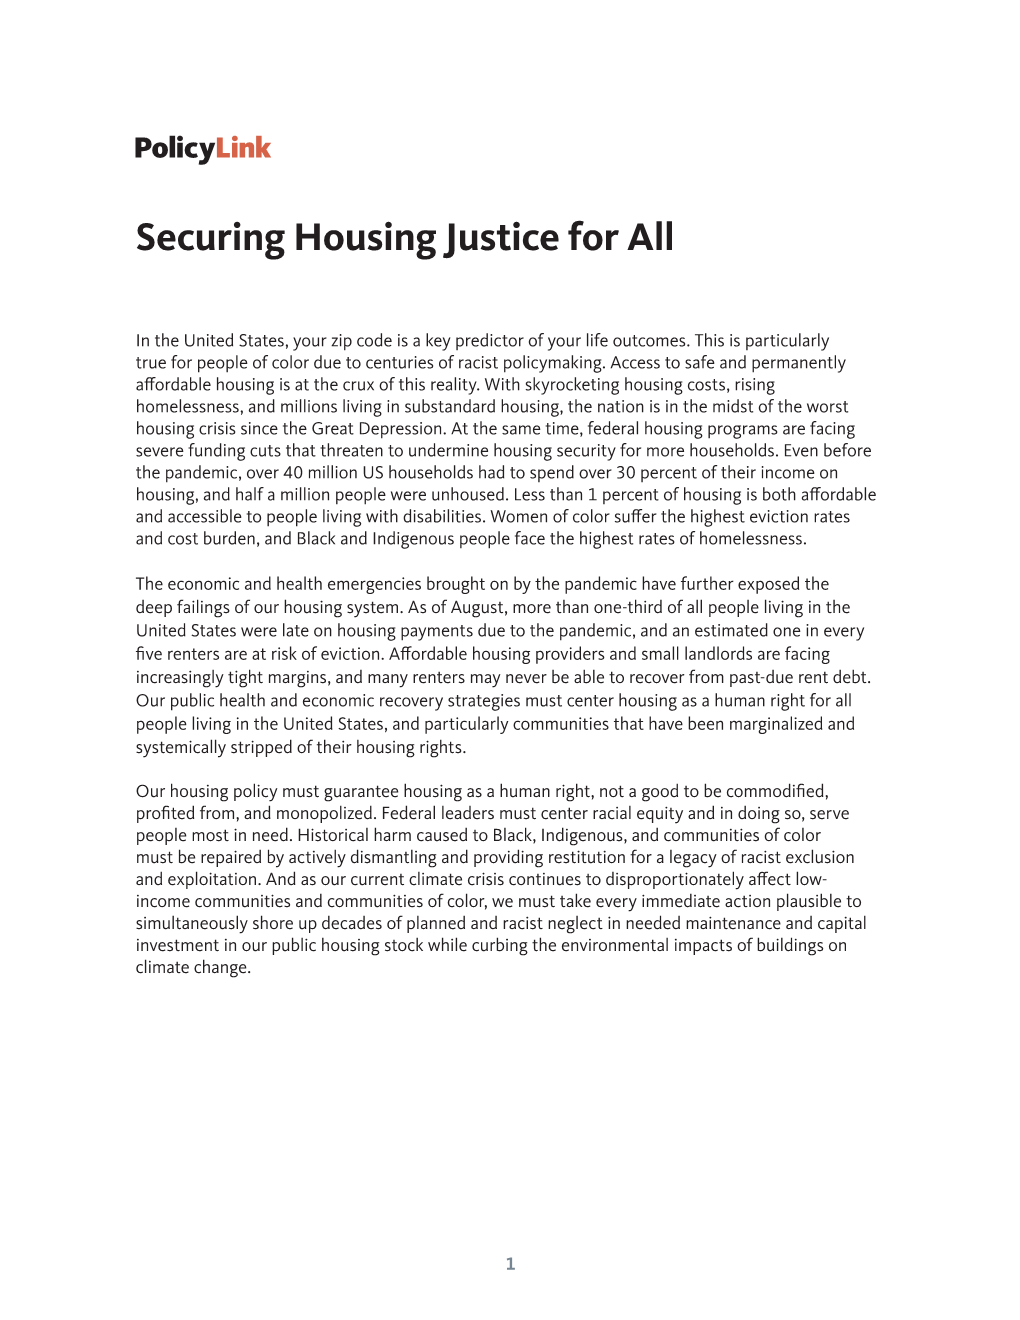 Securing Housing Justice for All